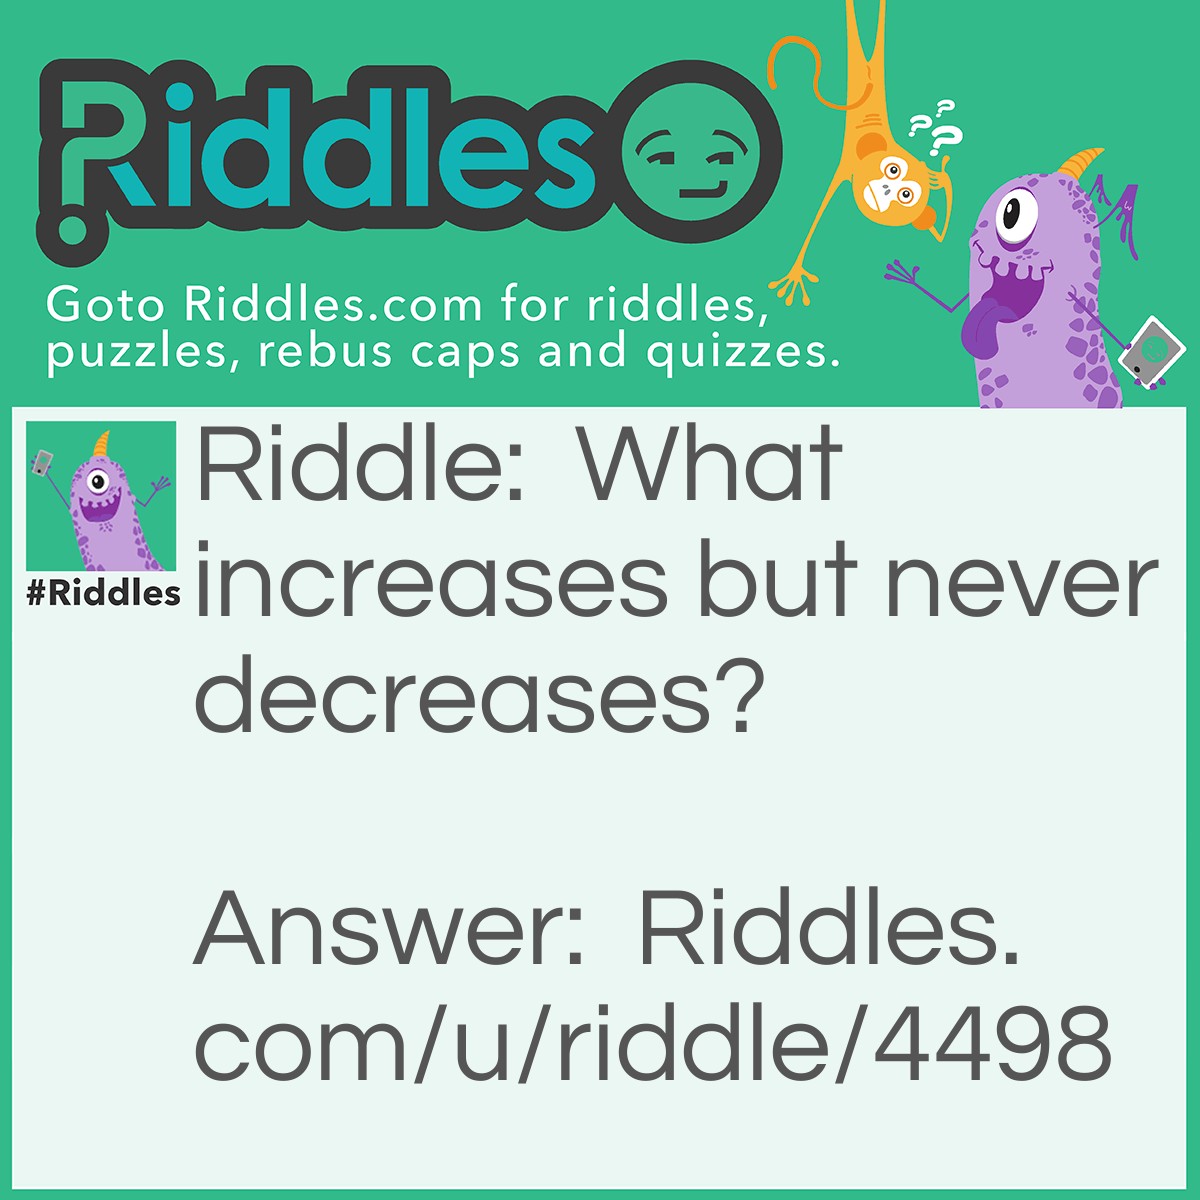 Riddle: What increases but never decreases? Answer: Your age.